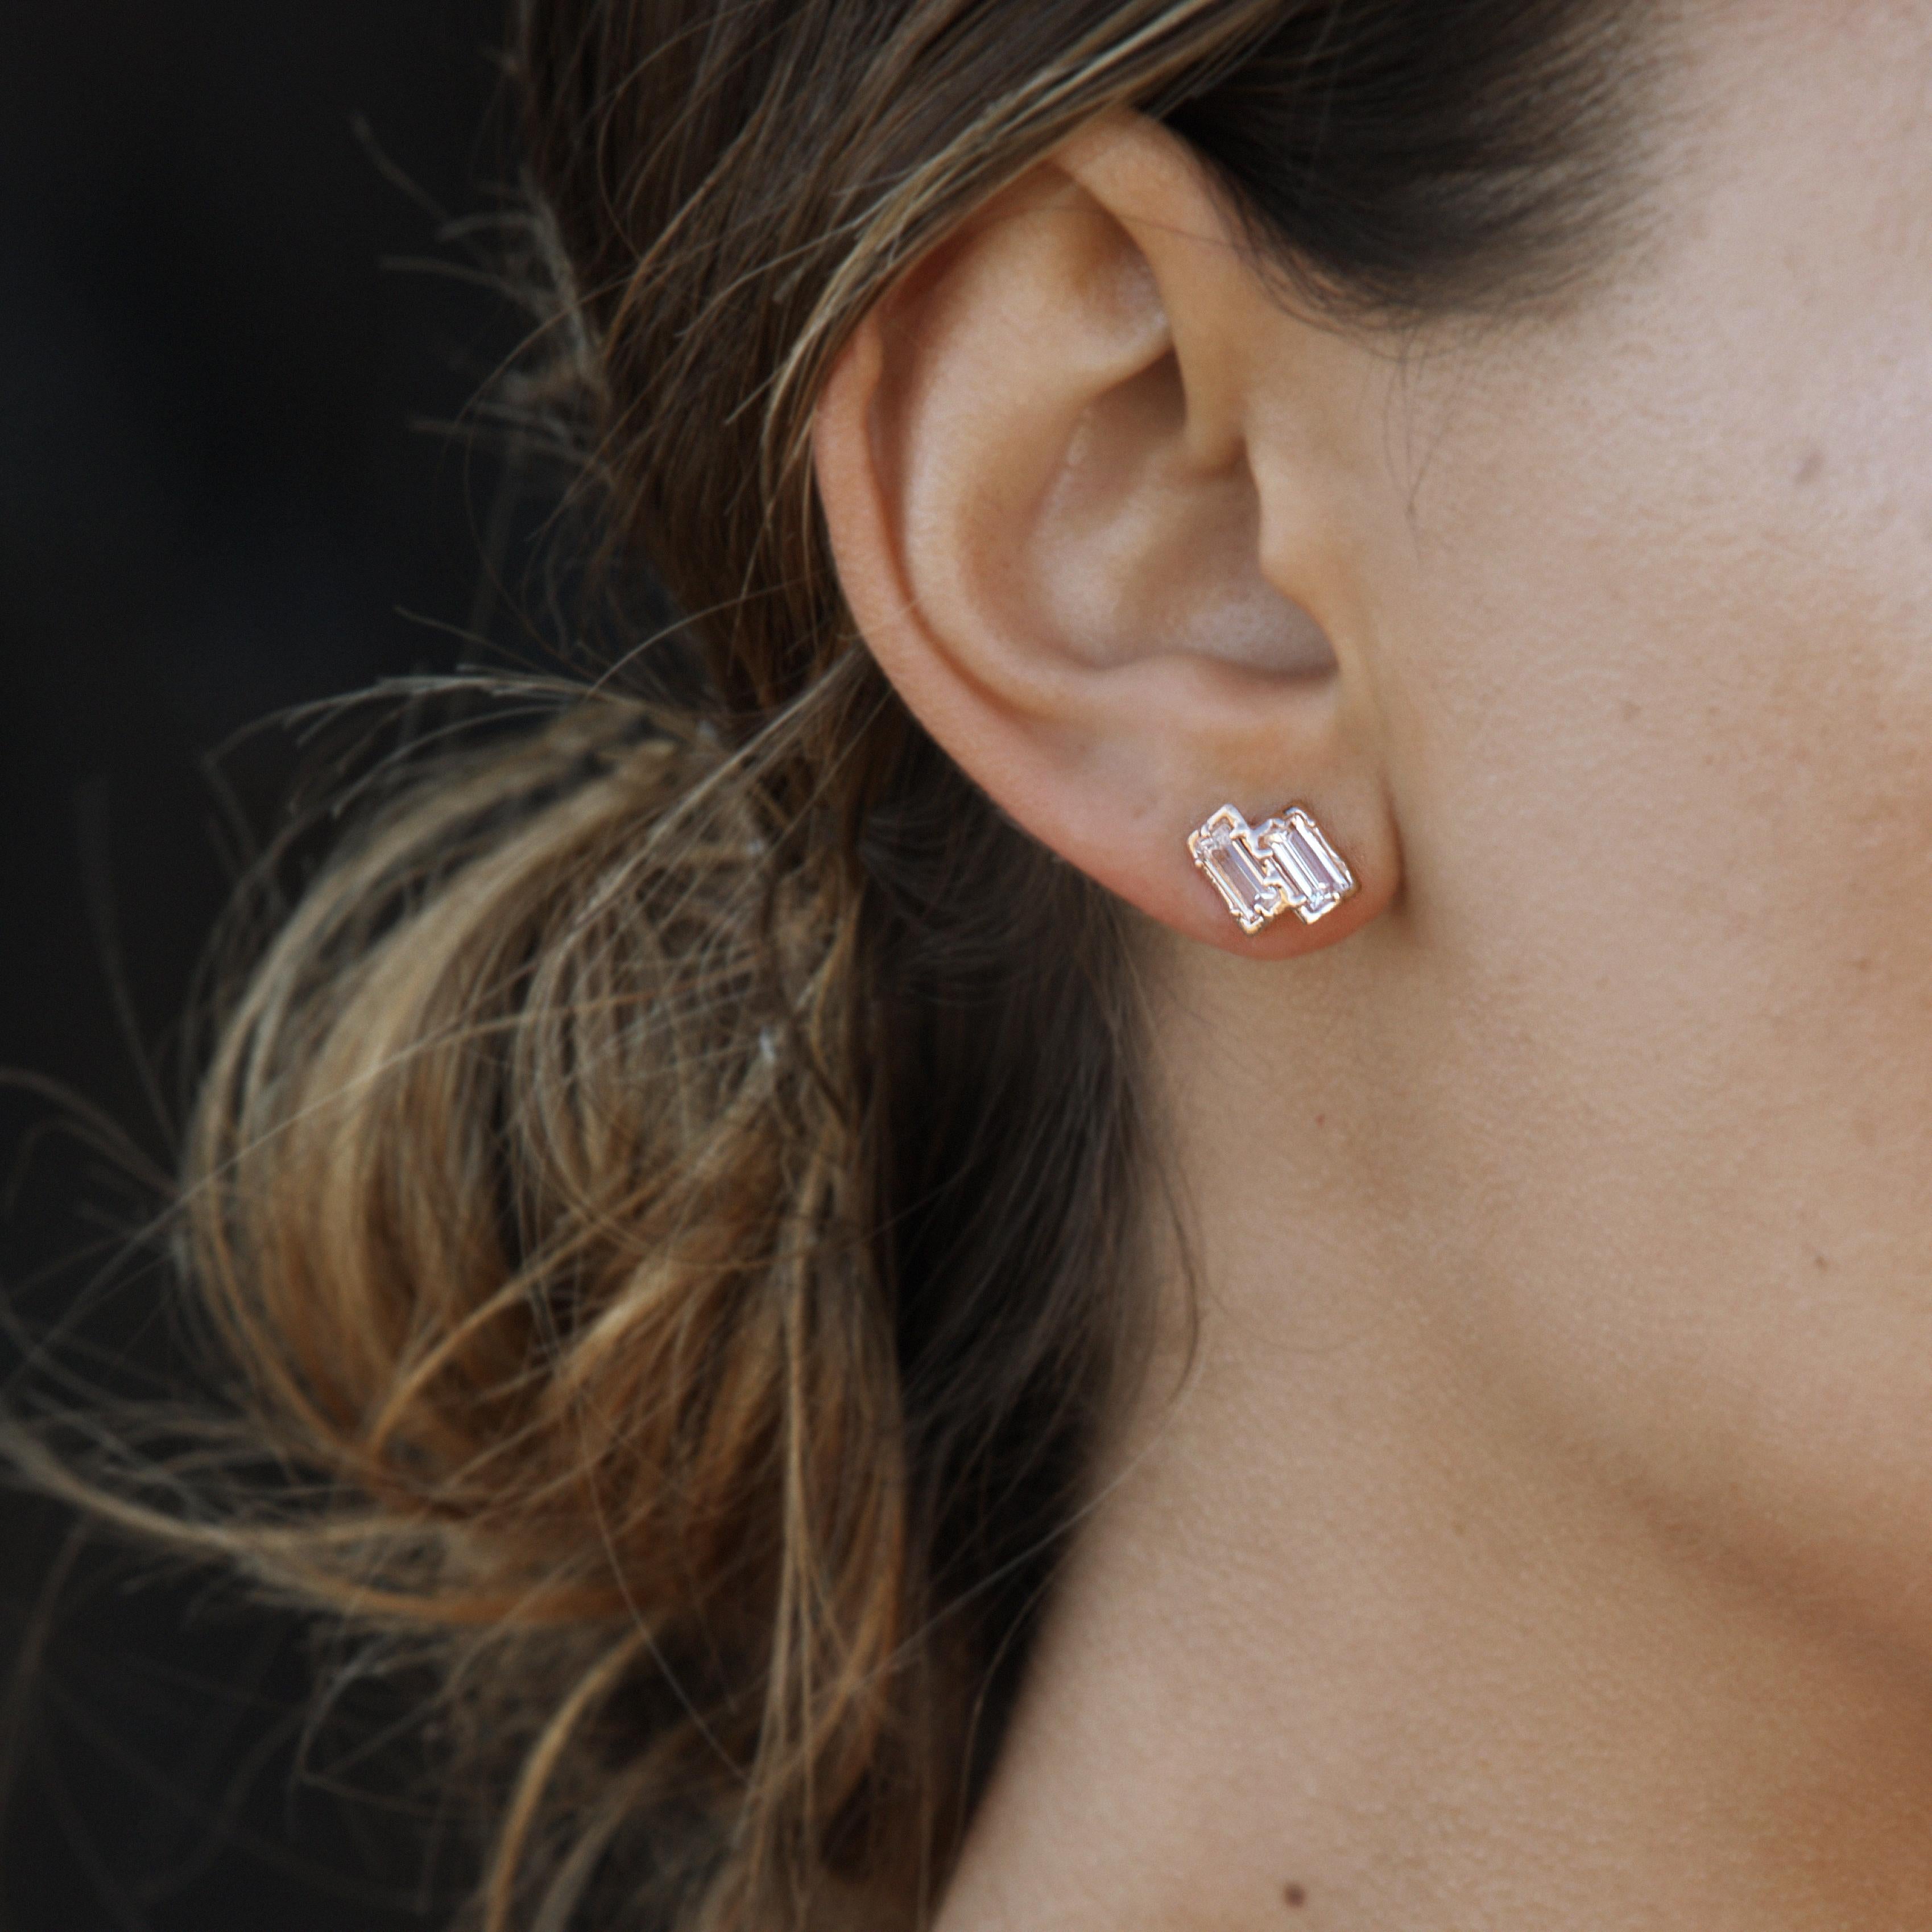 Antidote to the traditional stud earring, these 